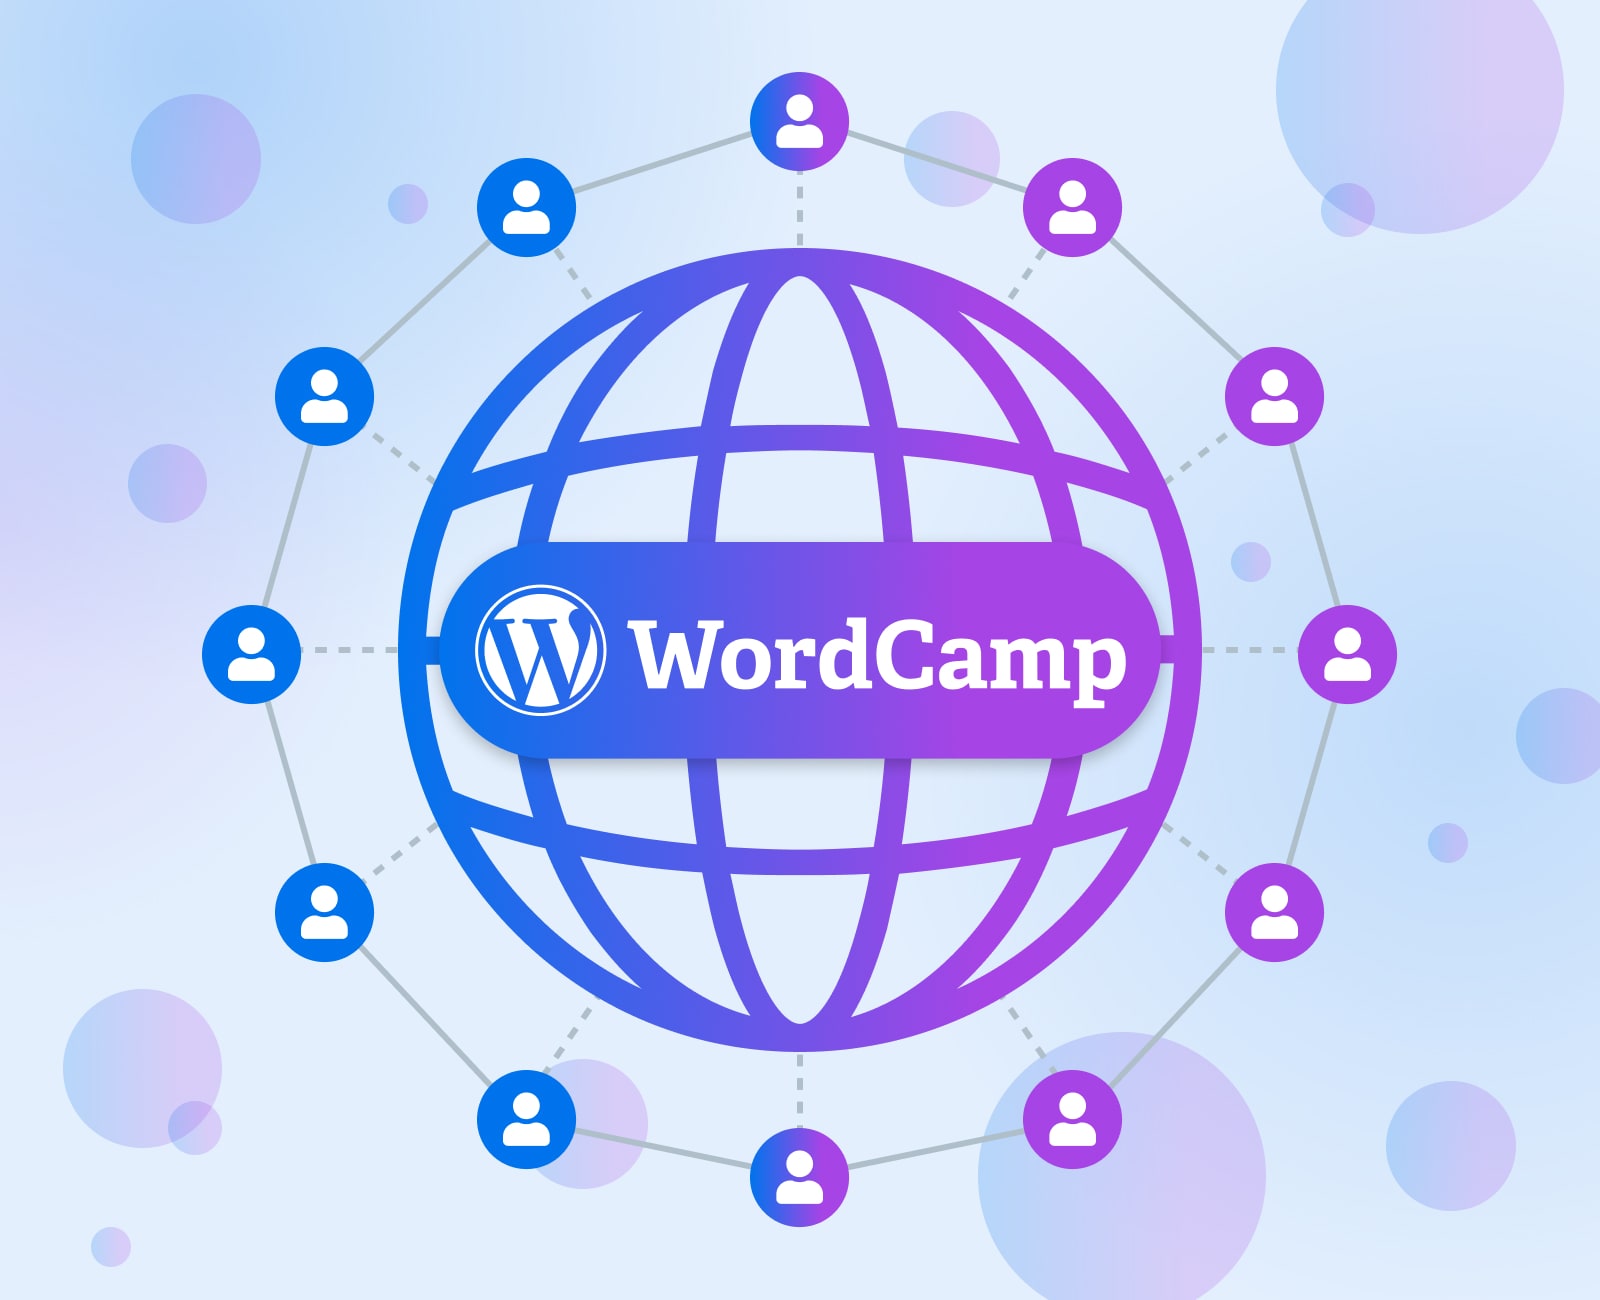 wordcamp global icon with people connected all around